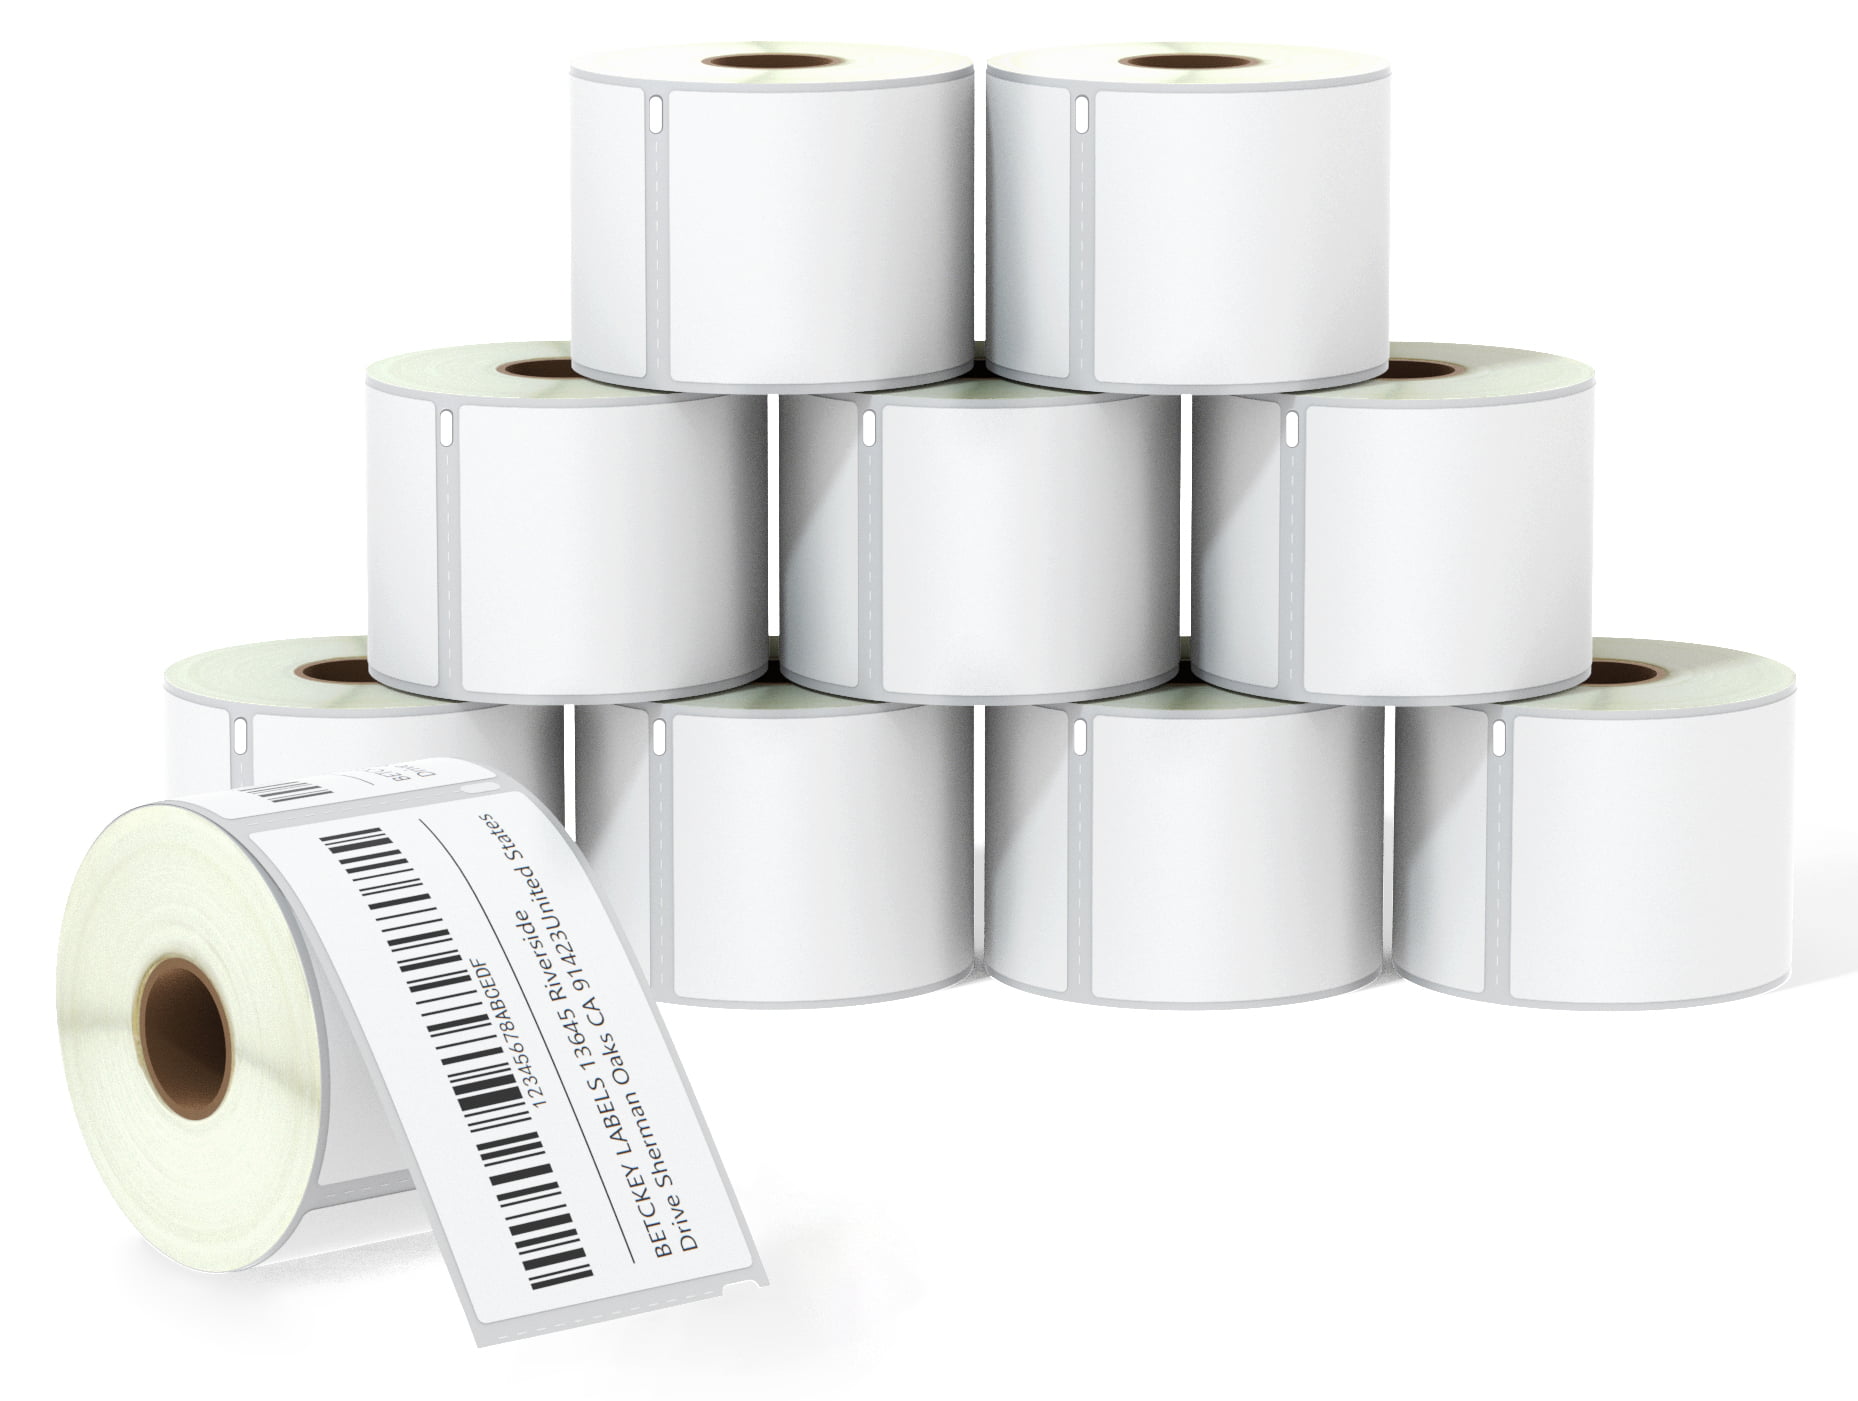 2.25 x 1.25 UPC Barcode & Multipurpose Labels Compatible with Zebra & Rollo Label Printer,Premium Adhesive & Perforated BETCKEY 6 Rolls, 6000 Labels 